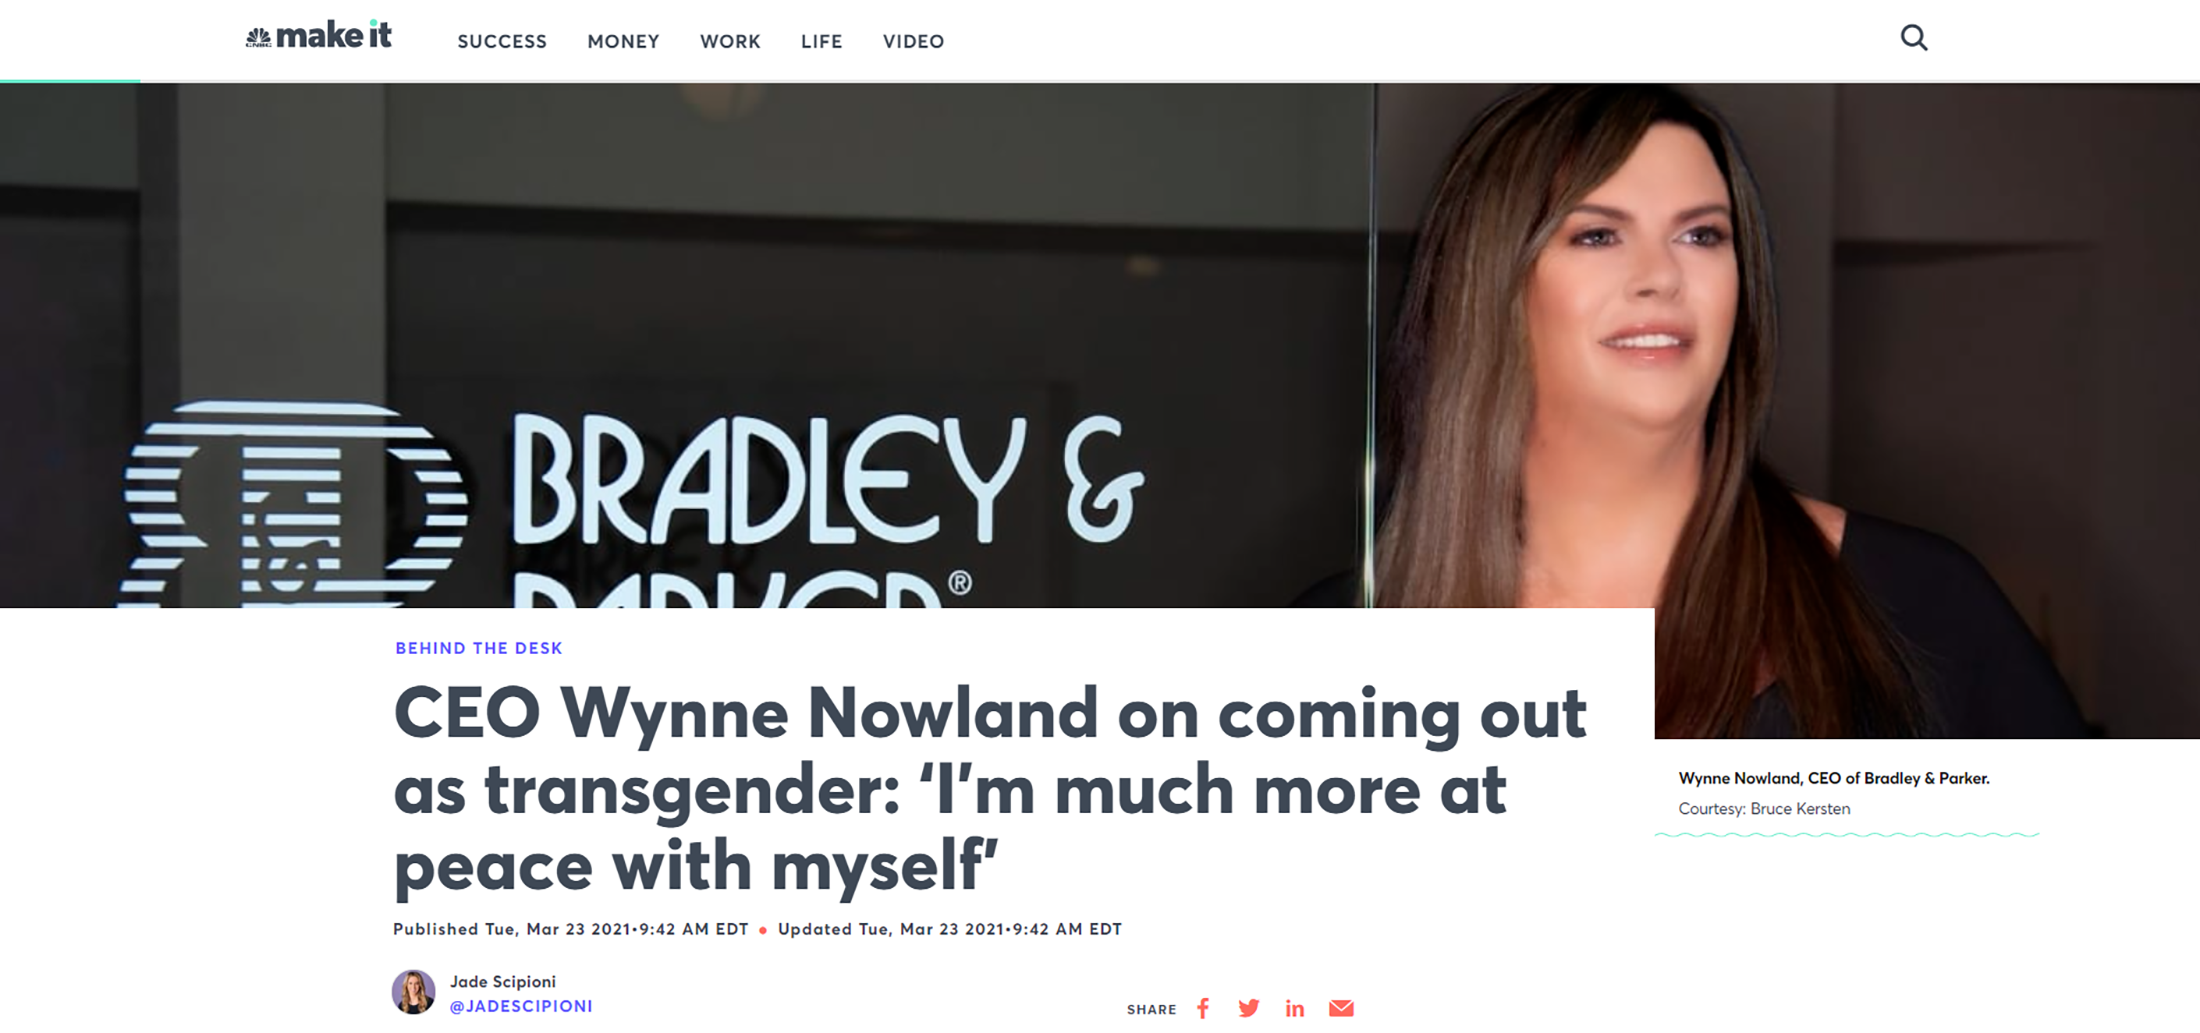 cnbc-make-it-publishes-feature-article-on-ceo-wynne-nowland